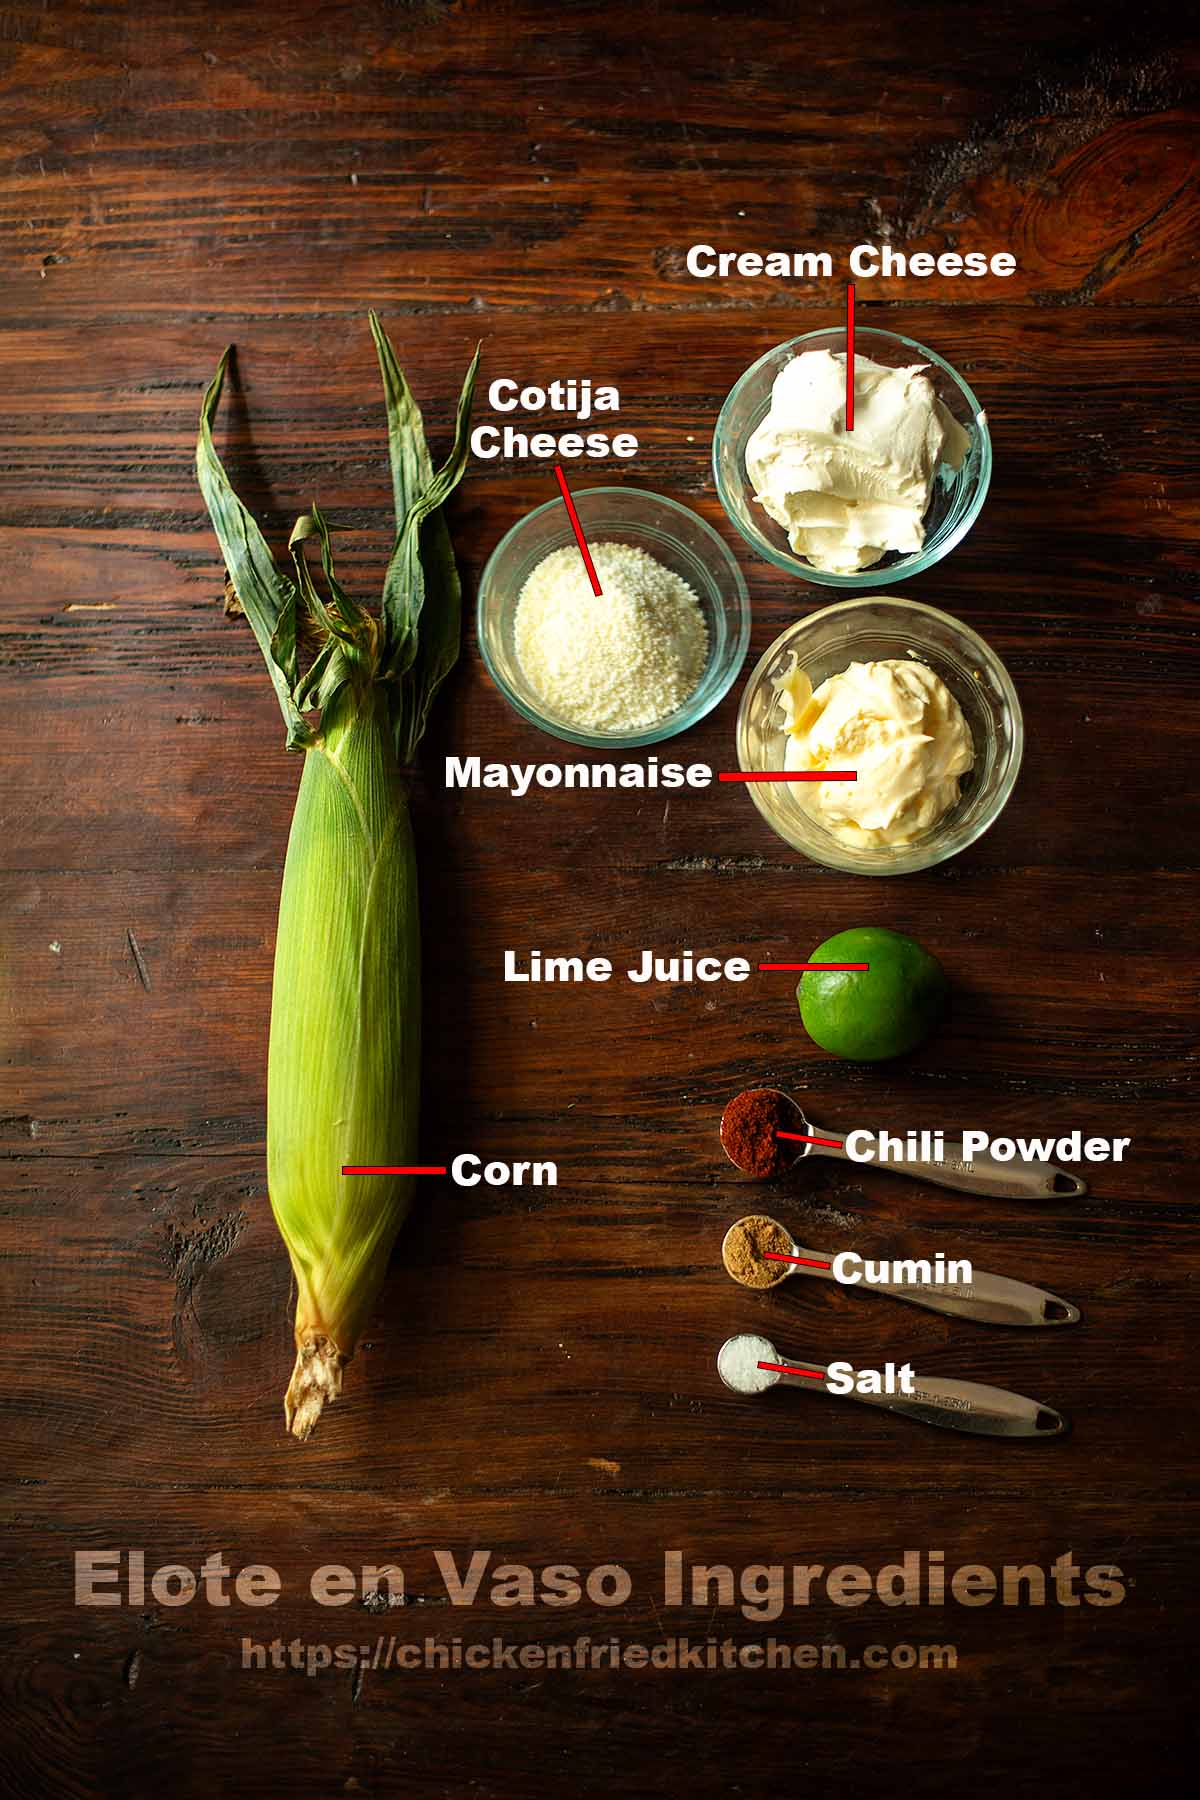 Elote en Vaso ingredients pictured and listed. 